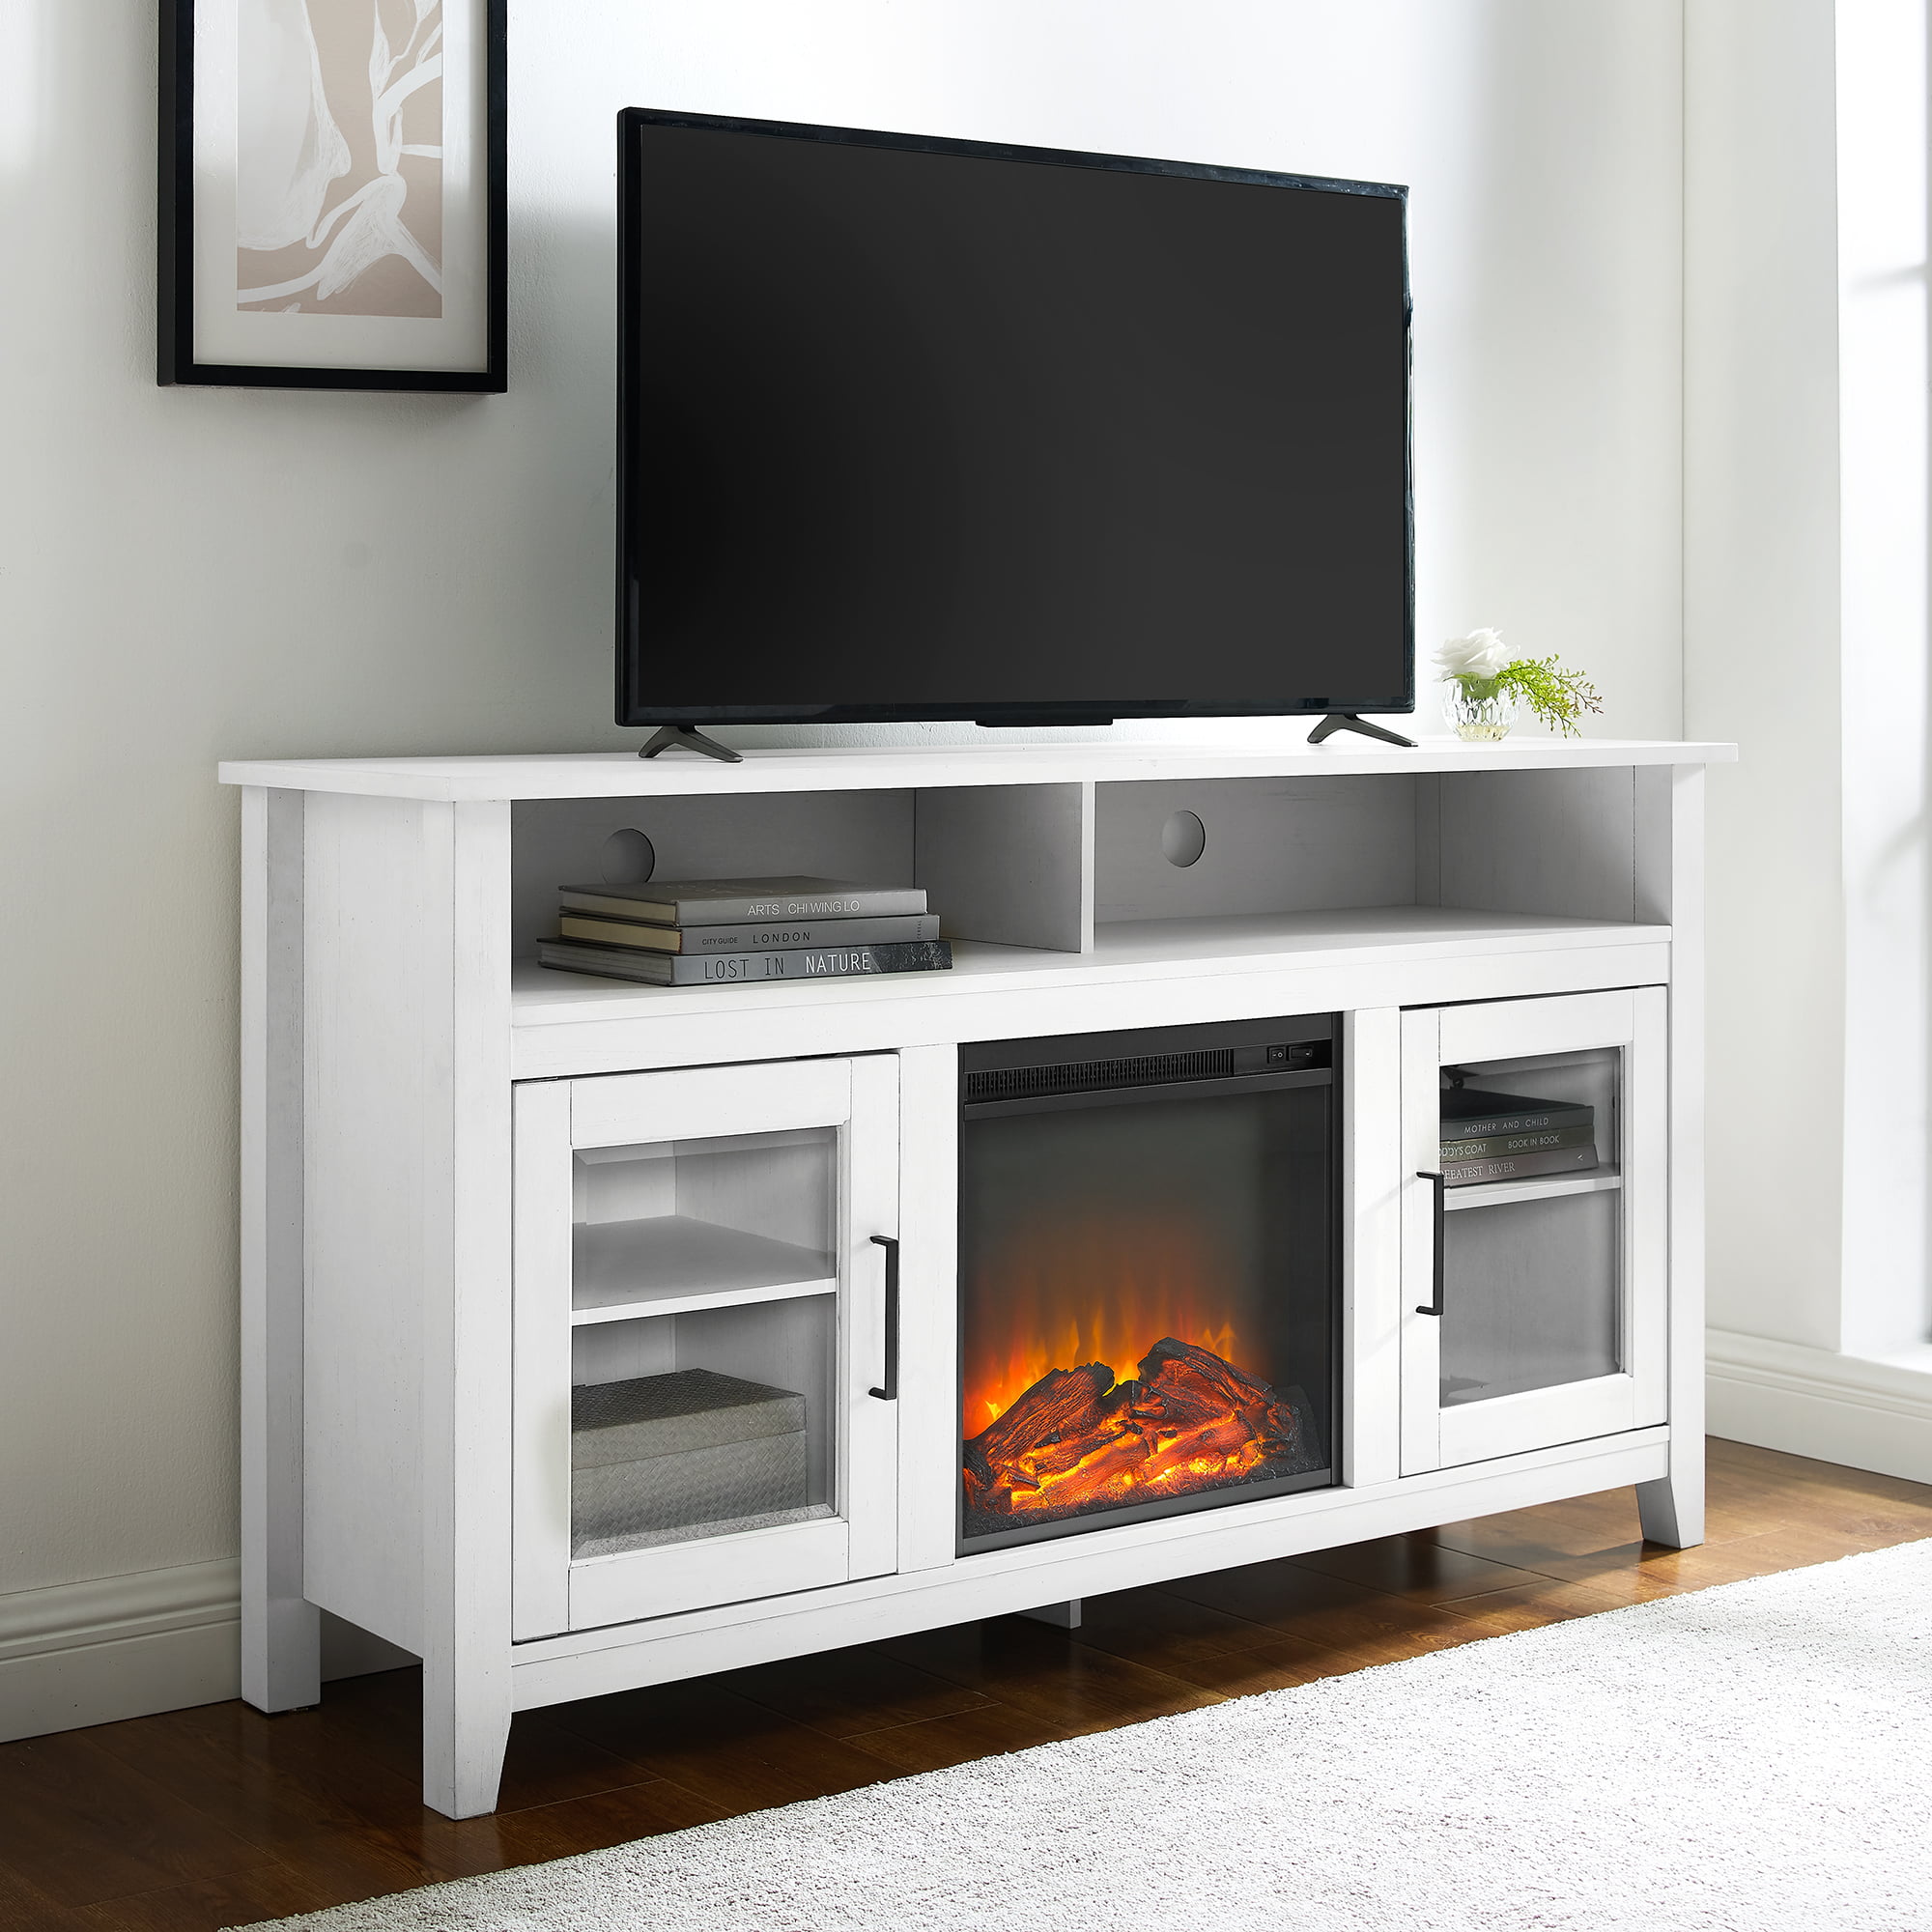 Woven Paths Highboy 2 Door Electric Fireplace TV Stand for TVs up to 65   Brushed White $298